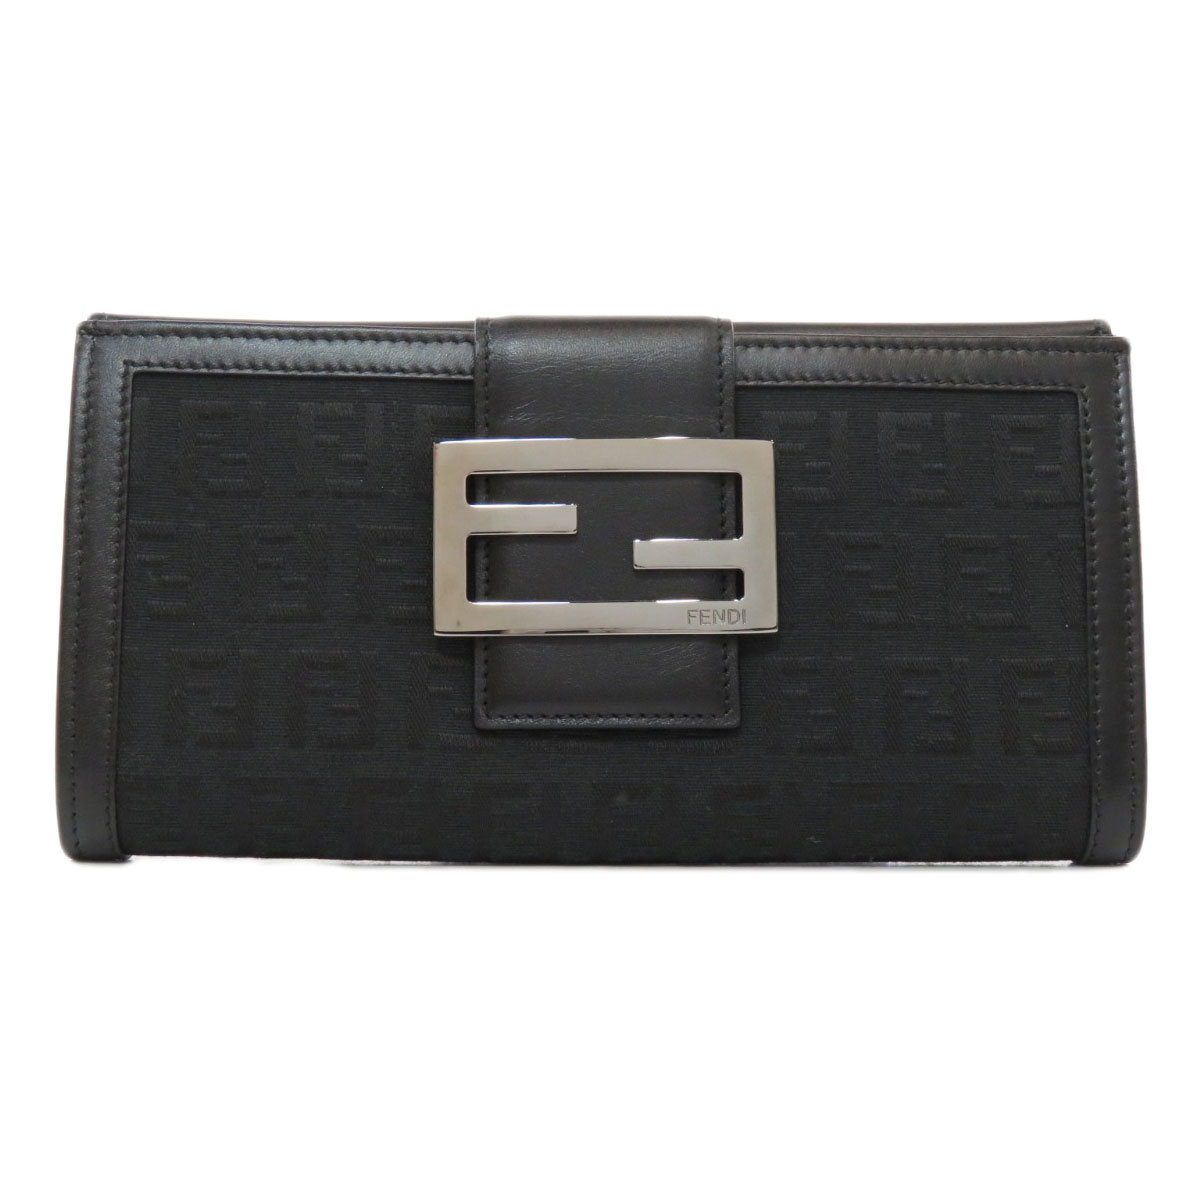 FENDI Long wallet (with Coin Pocket) Zucca pattern logo Canvas Leather | eBay